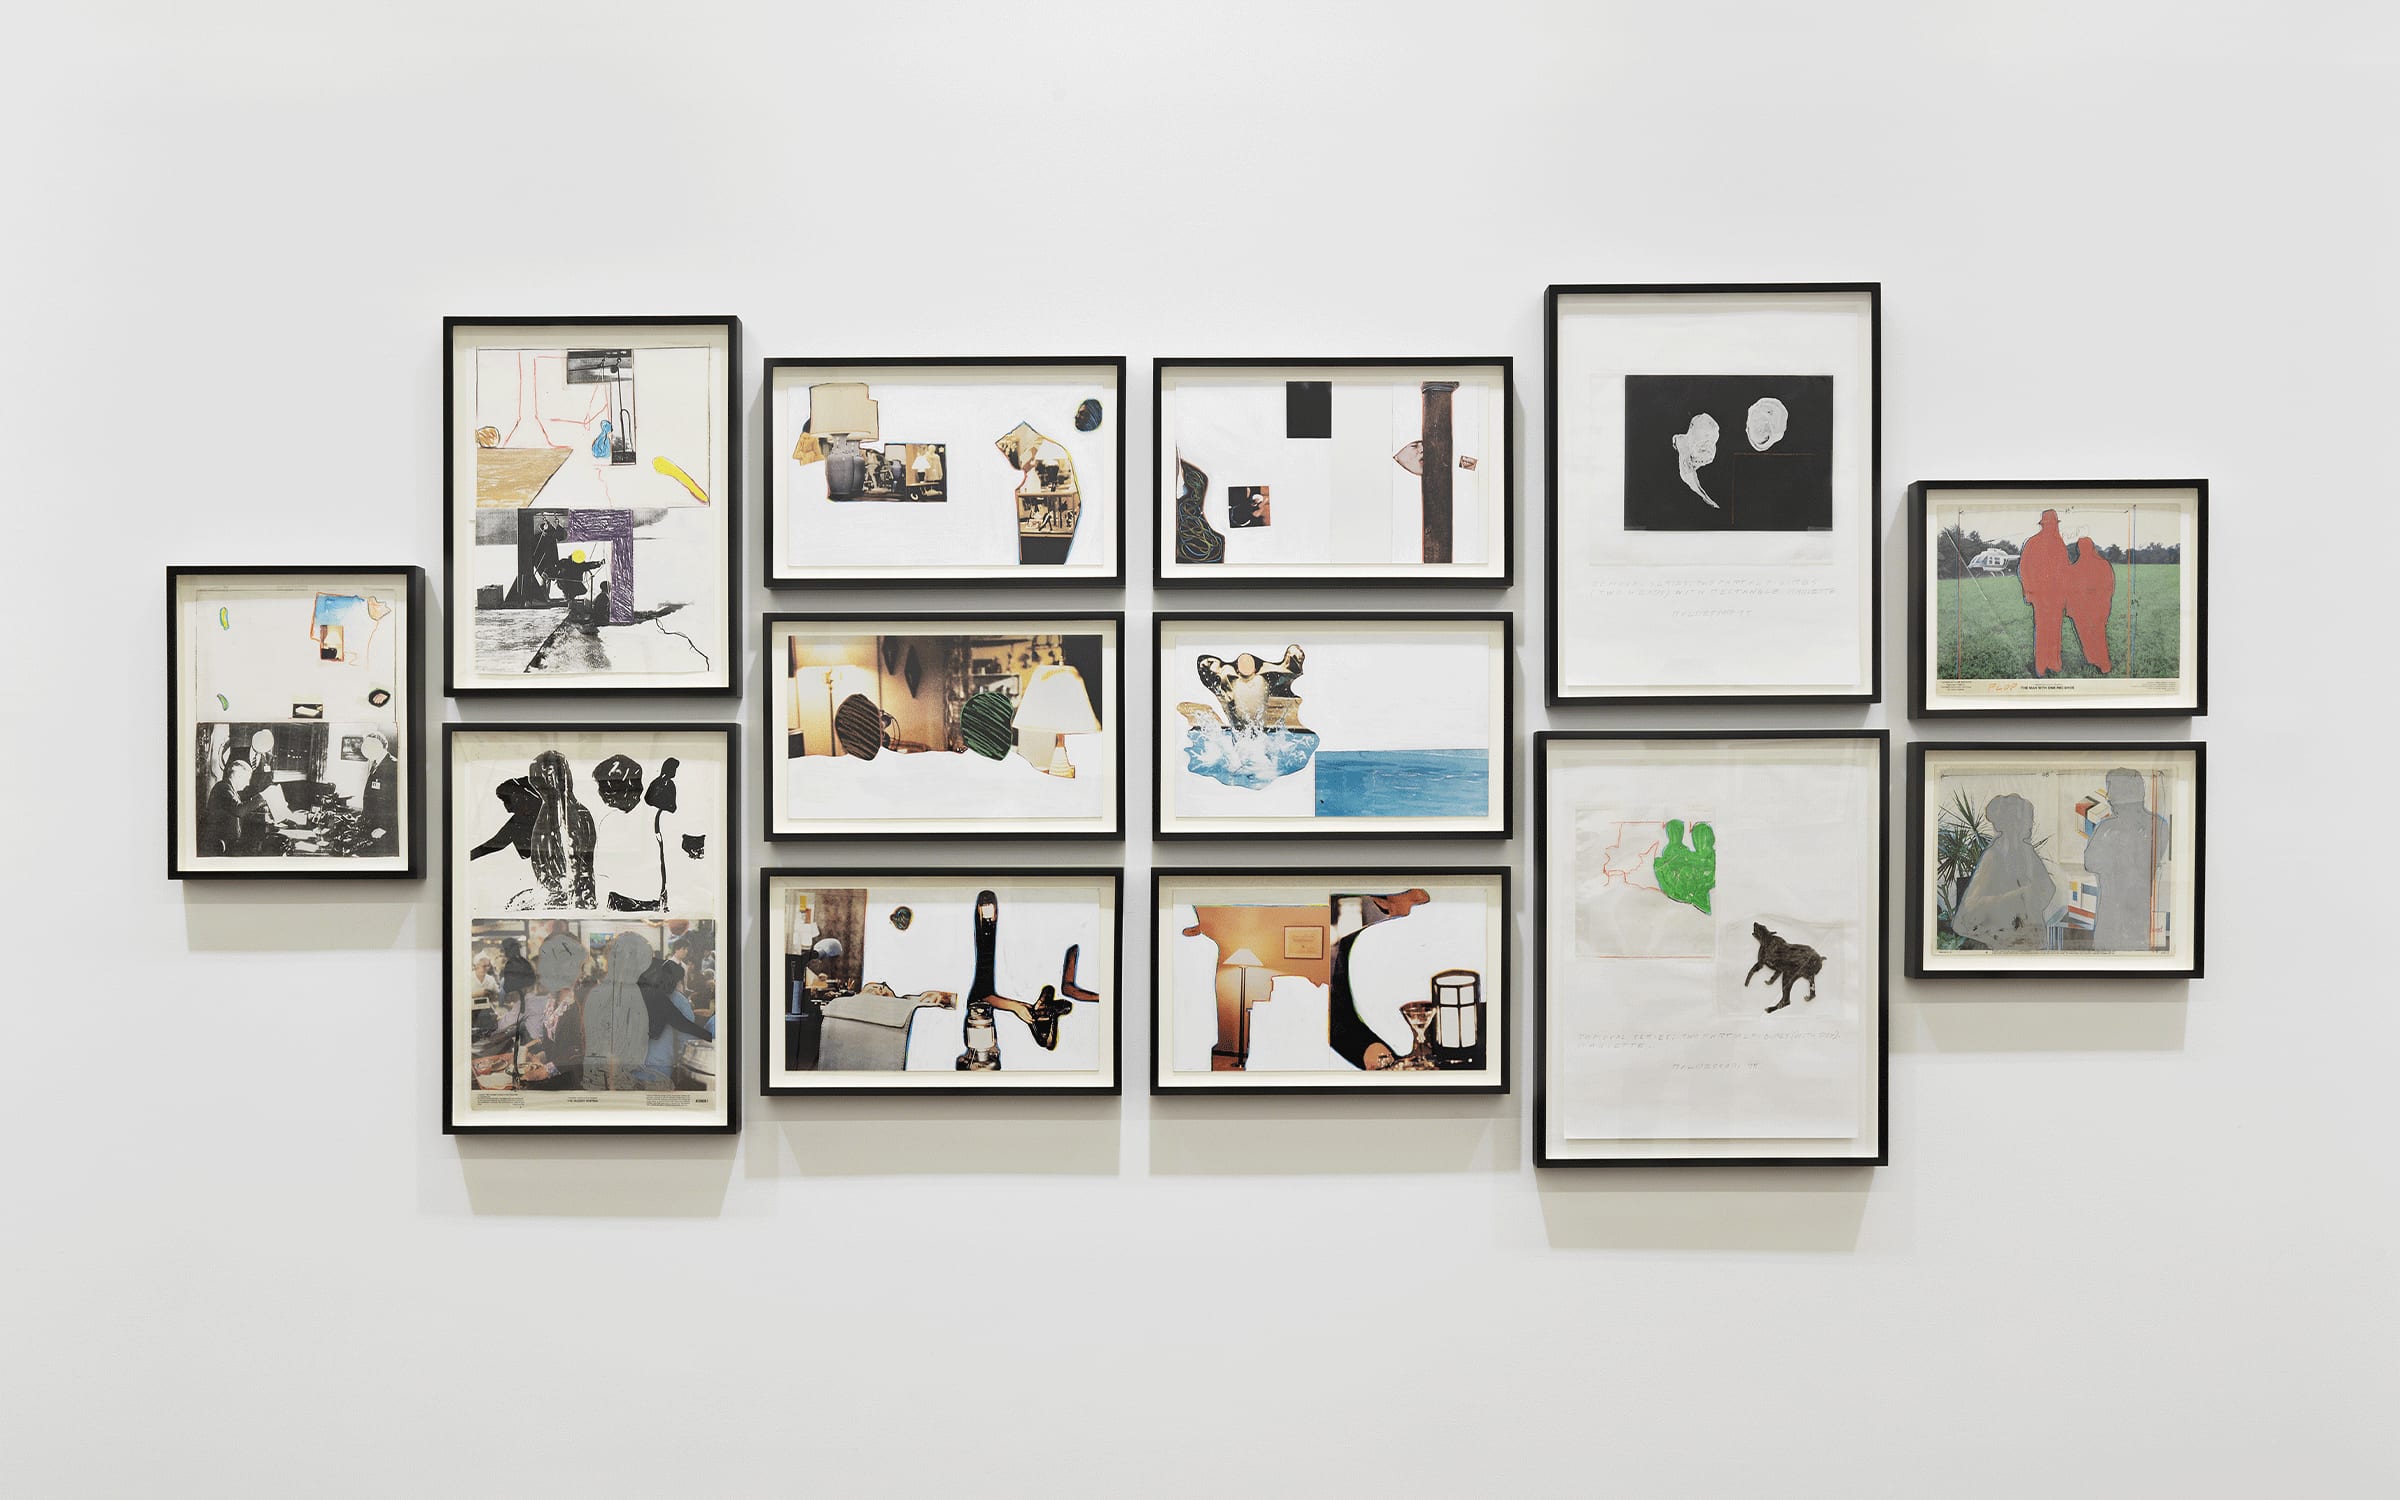 Installation view of John Baldessari’s exhibition ‘The Story Underneath’ at Sprüth Magers, New York, 2022. Photograph by Genevieve Hanson. Courtesy of the estate of John Baldessari and Sprüth Magers.